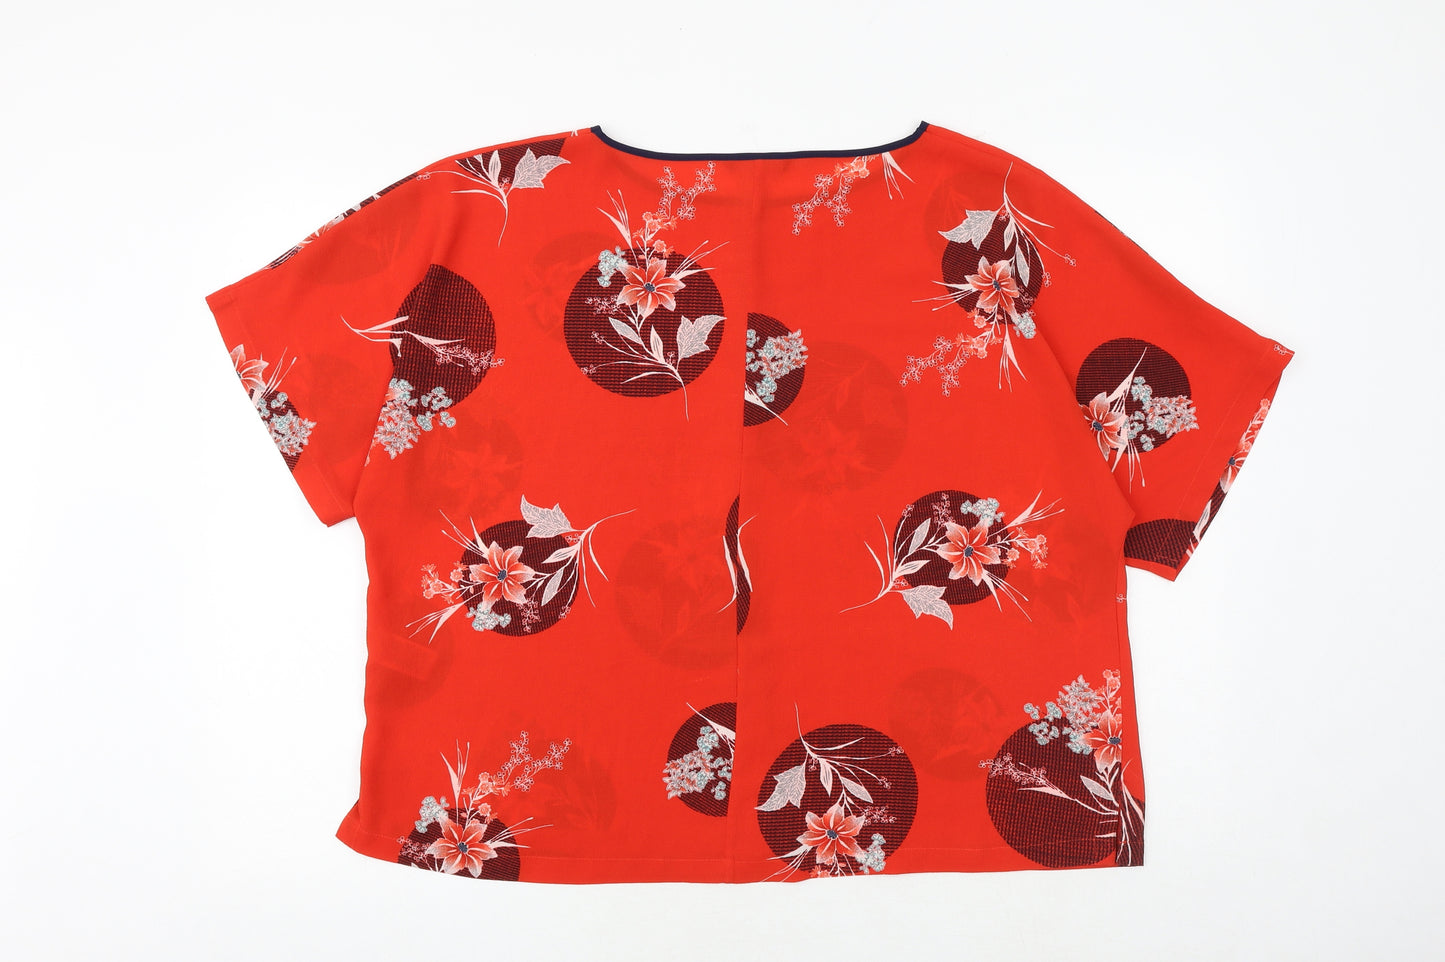 Marks and Spencer Womens Red Floral Polyester Basic Blouse Size 18 Boat Neck - Contrasting Trim